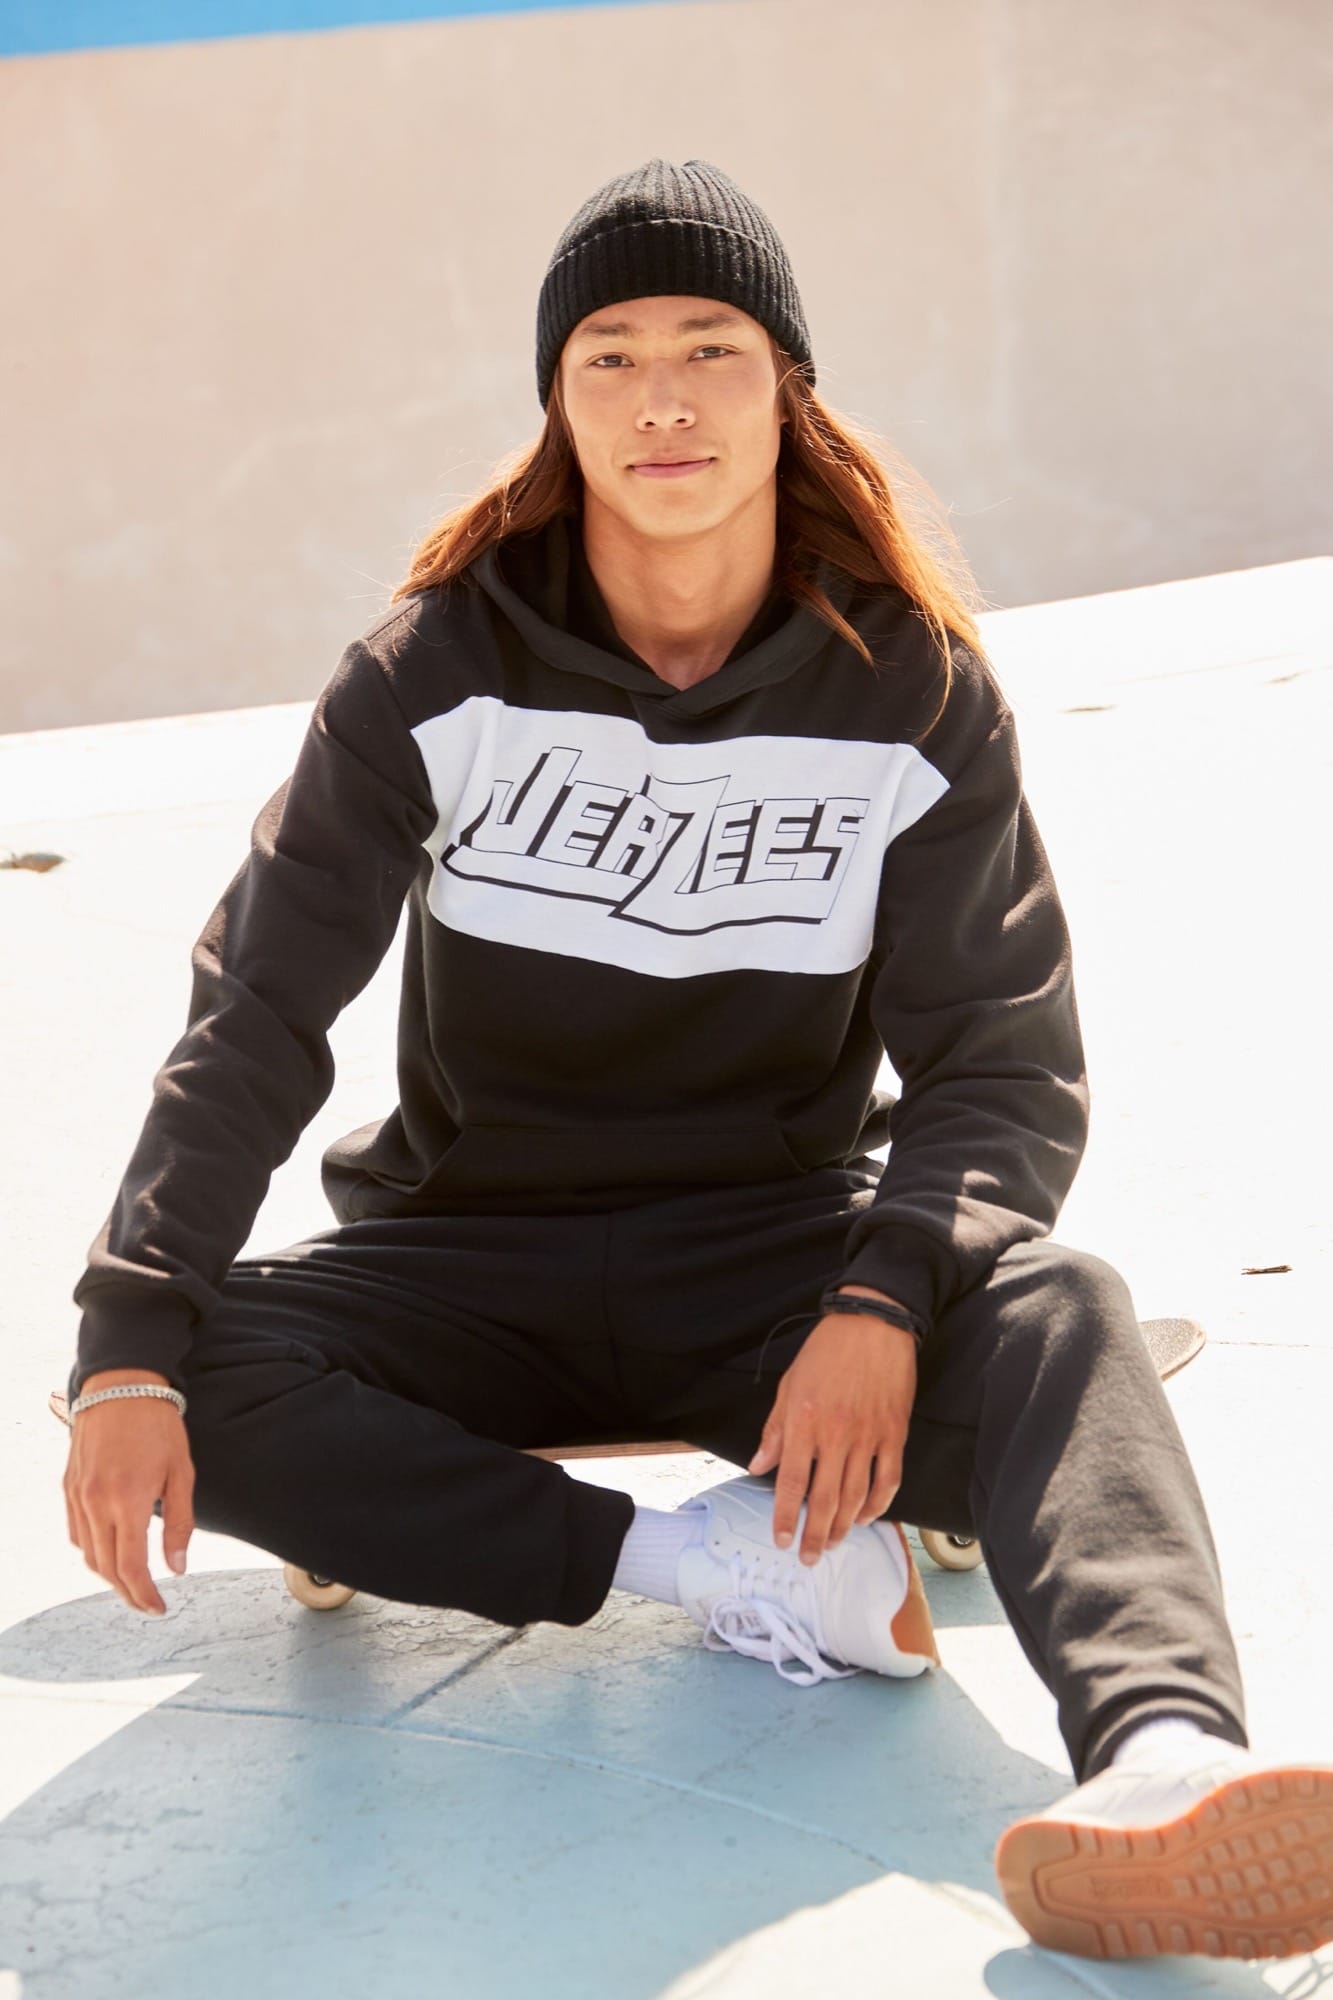 Jerzees: Empowering Self-Expression Through Quality Apparel